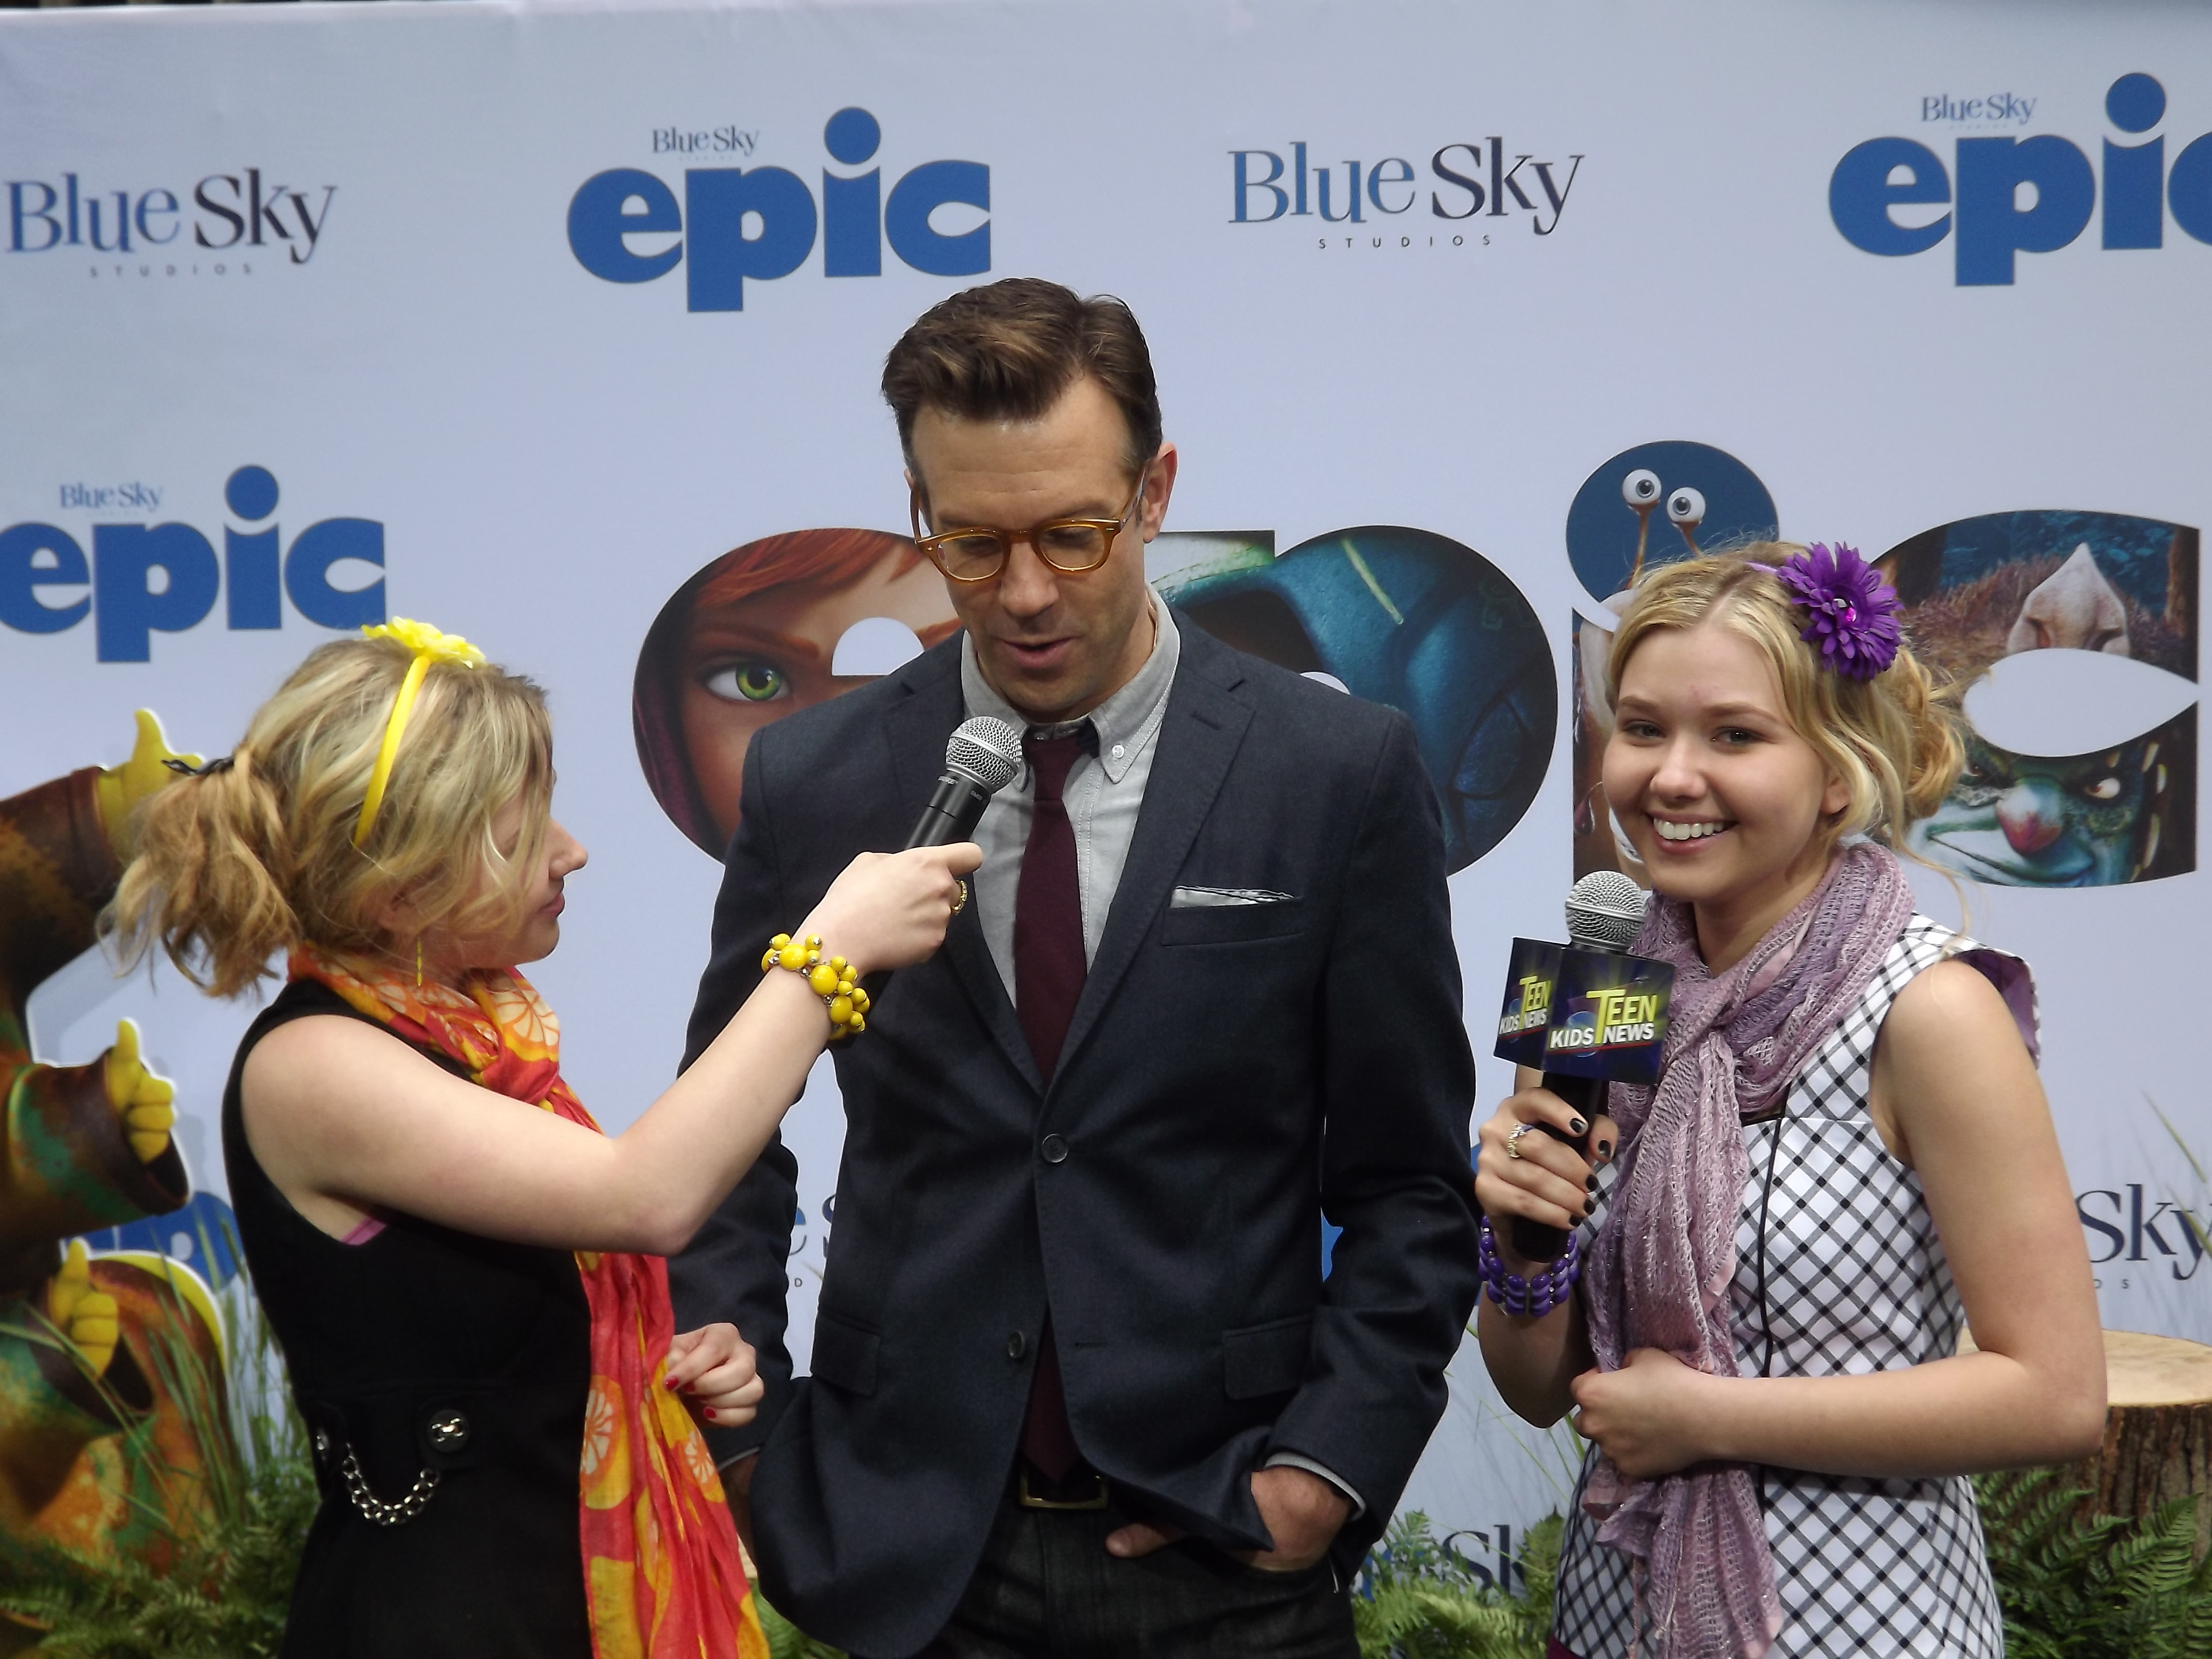 Cailin Loesch (right) and sister Hannah Loesch interviewing Jason Sudeikis at the NYC premiere of Epic